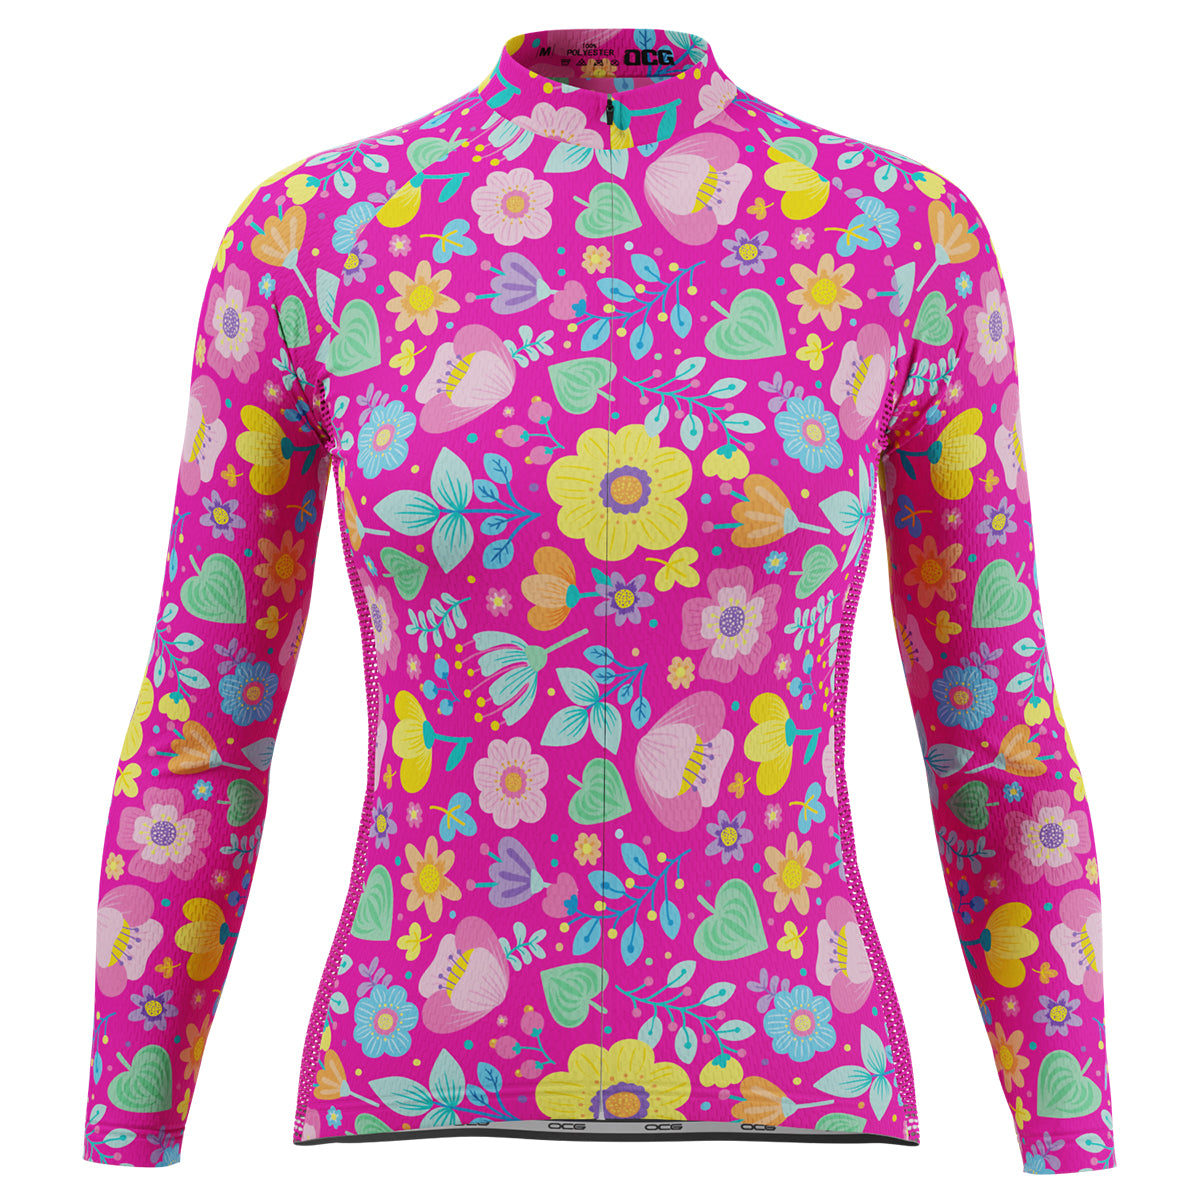 Women's Bouquet Floral Long Sleeve Cycling Jersey